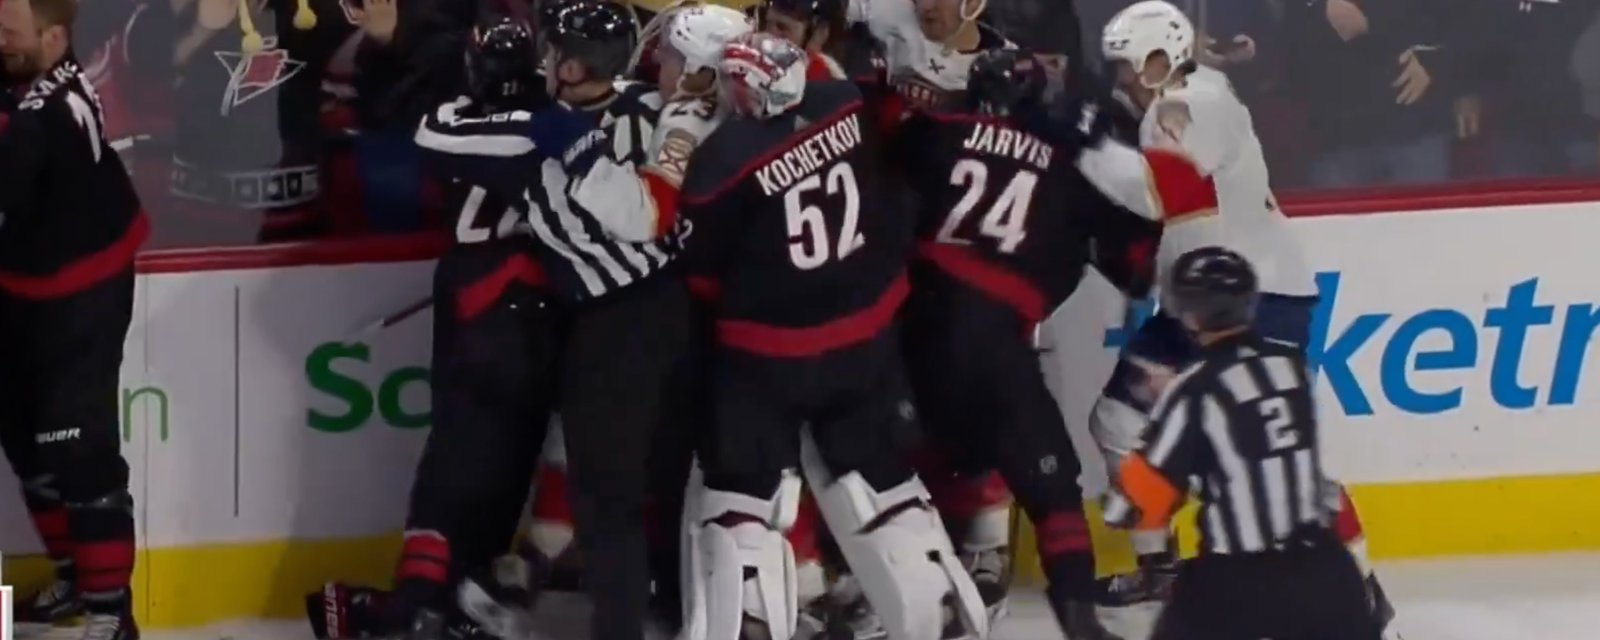 Buzzer full line brawl between Panthers and Hurricanes!